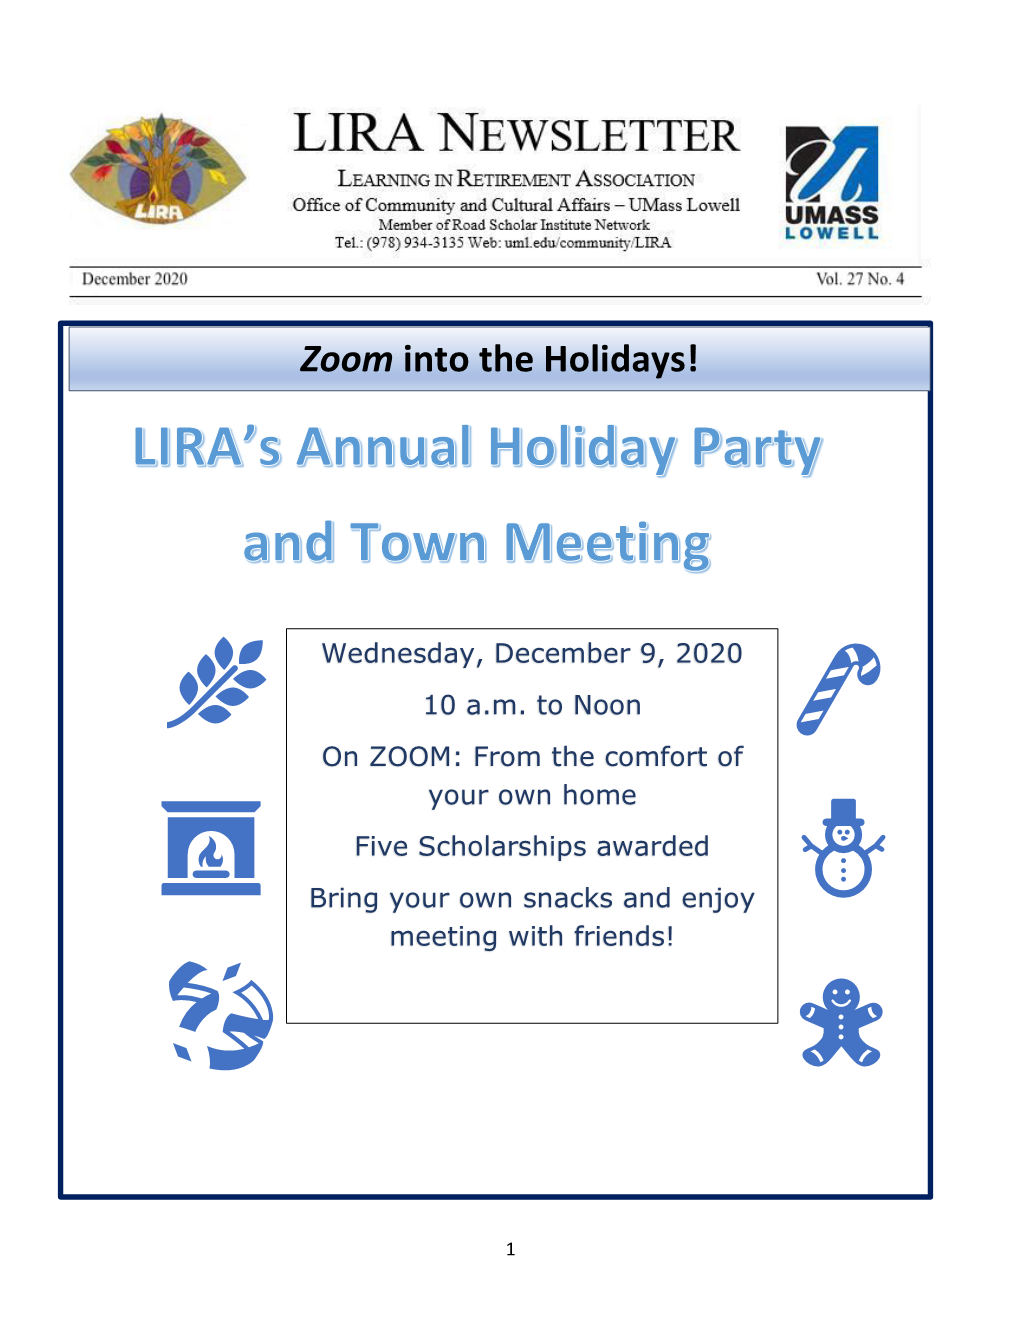 LIRA's Annual Holiday Party and Town Meeting